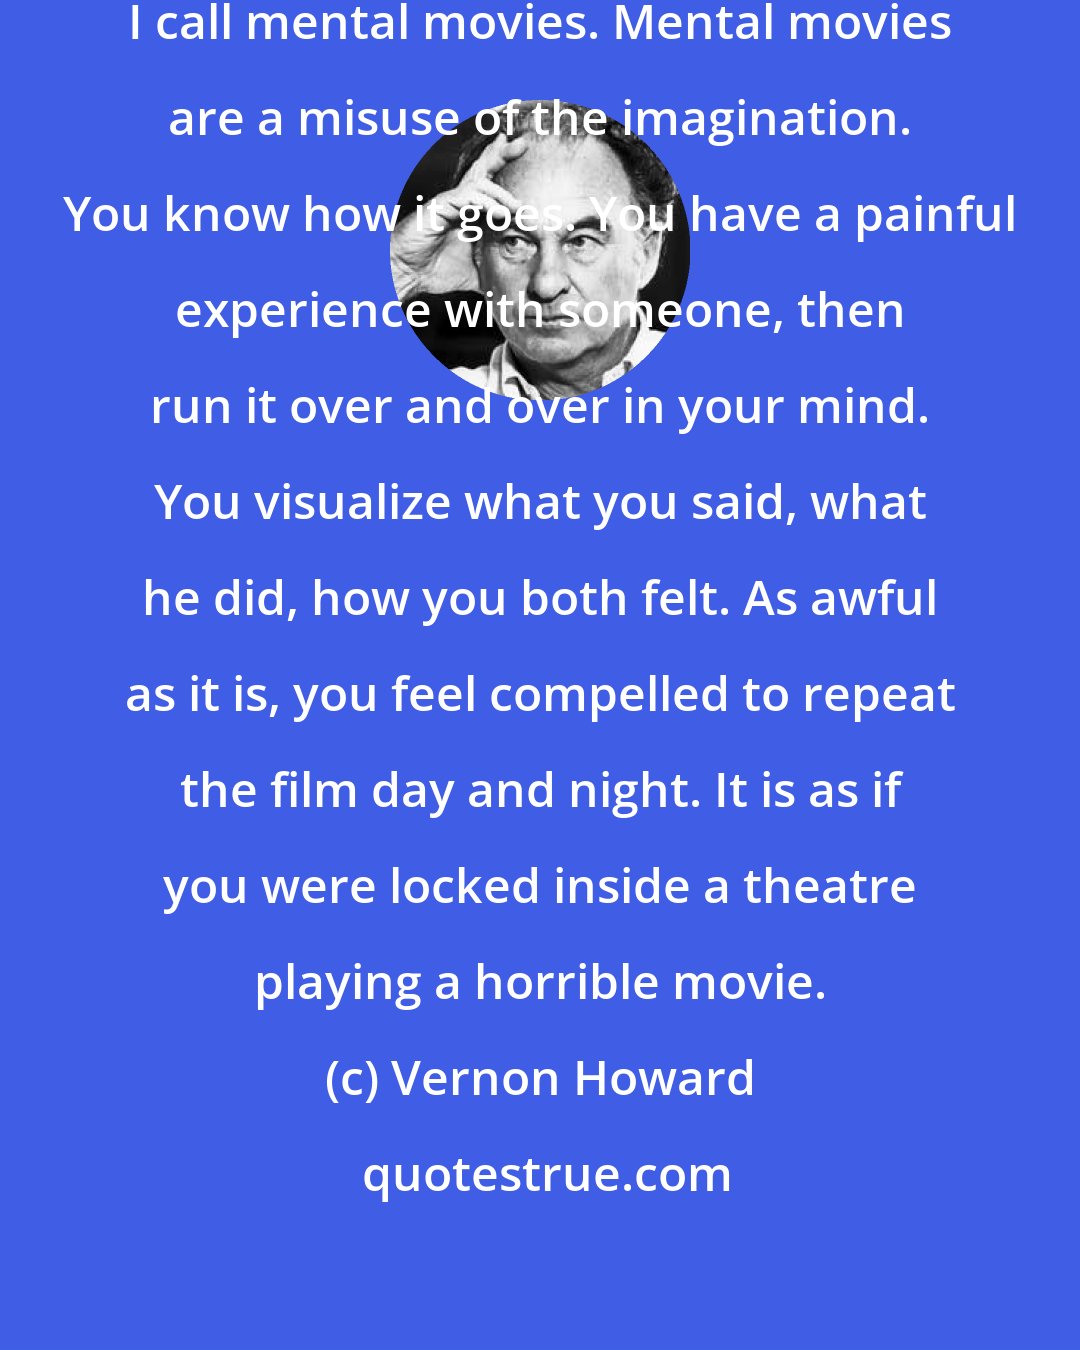 Vernon Howard: A chief cause of unhappiness is what I call mental movies. Mental movies are a misuse of the imagination. You know how it goes. You have a painful experience with someone, then run it over and over in your mind. You visualize what you said, what he did, how you both felt. As awful as it is, you feel compelled to repeat the film day and night. It is as if you were locked inside a theatre playing a horrible movie.